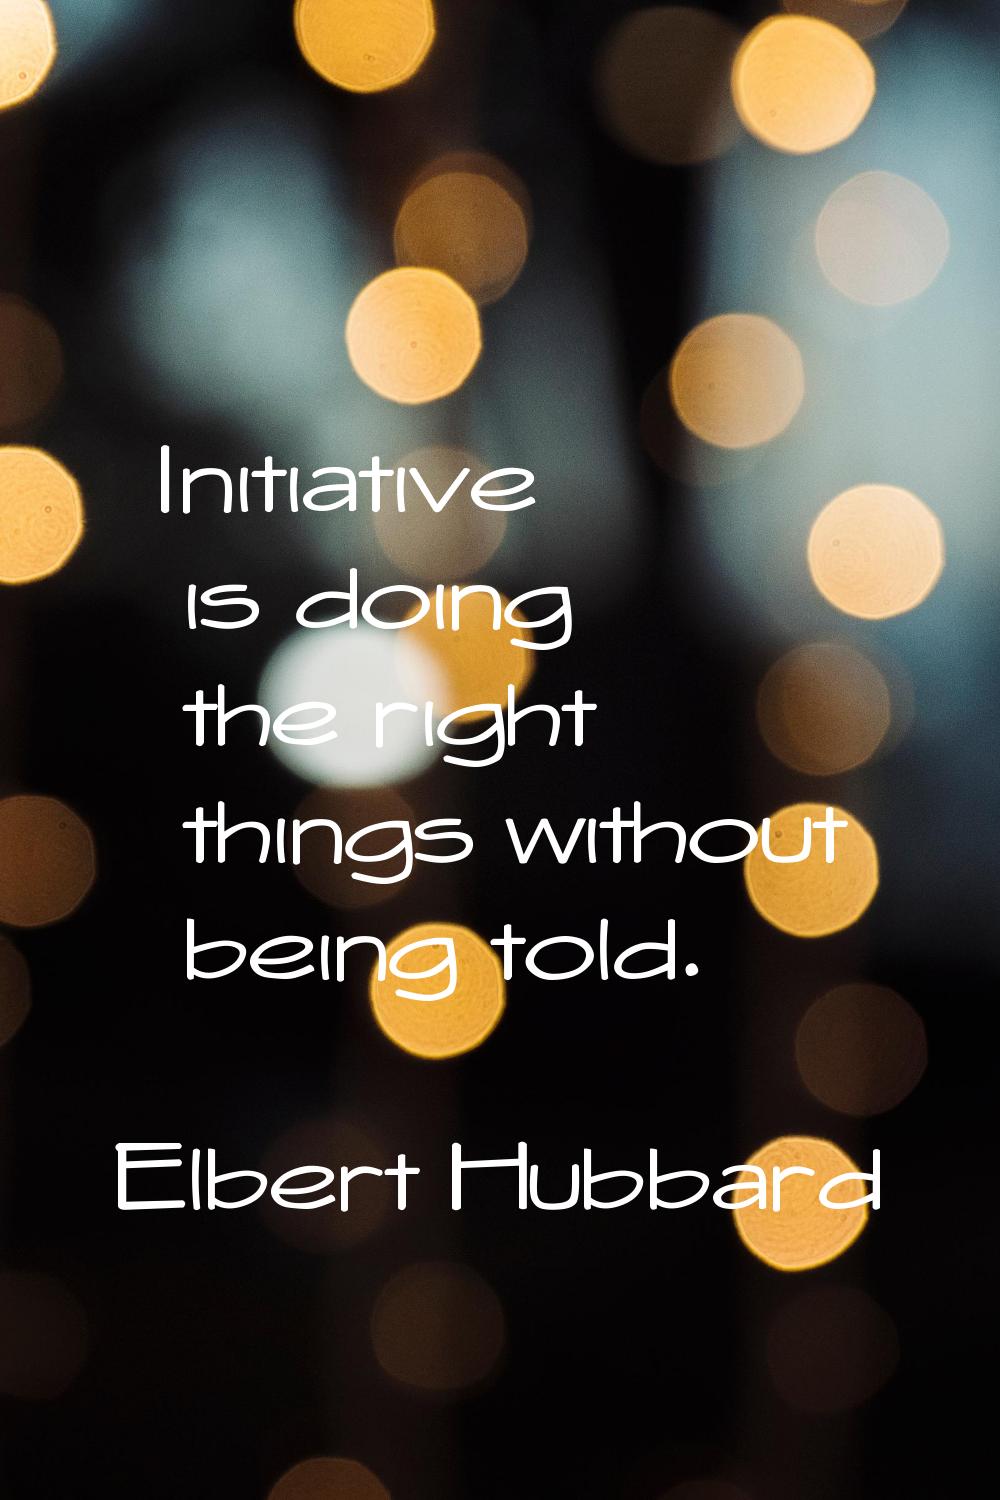 Initiative is doing the right things without being told.